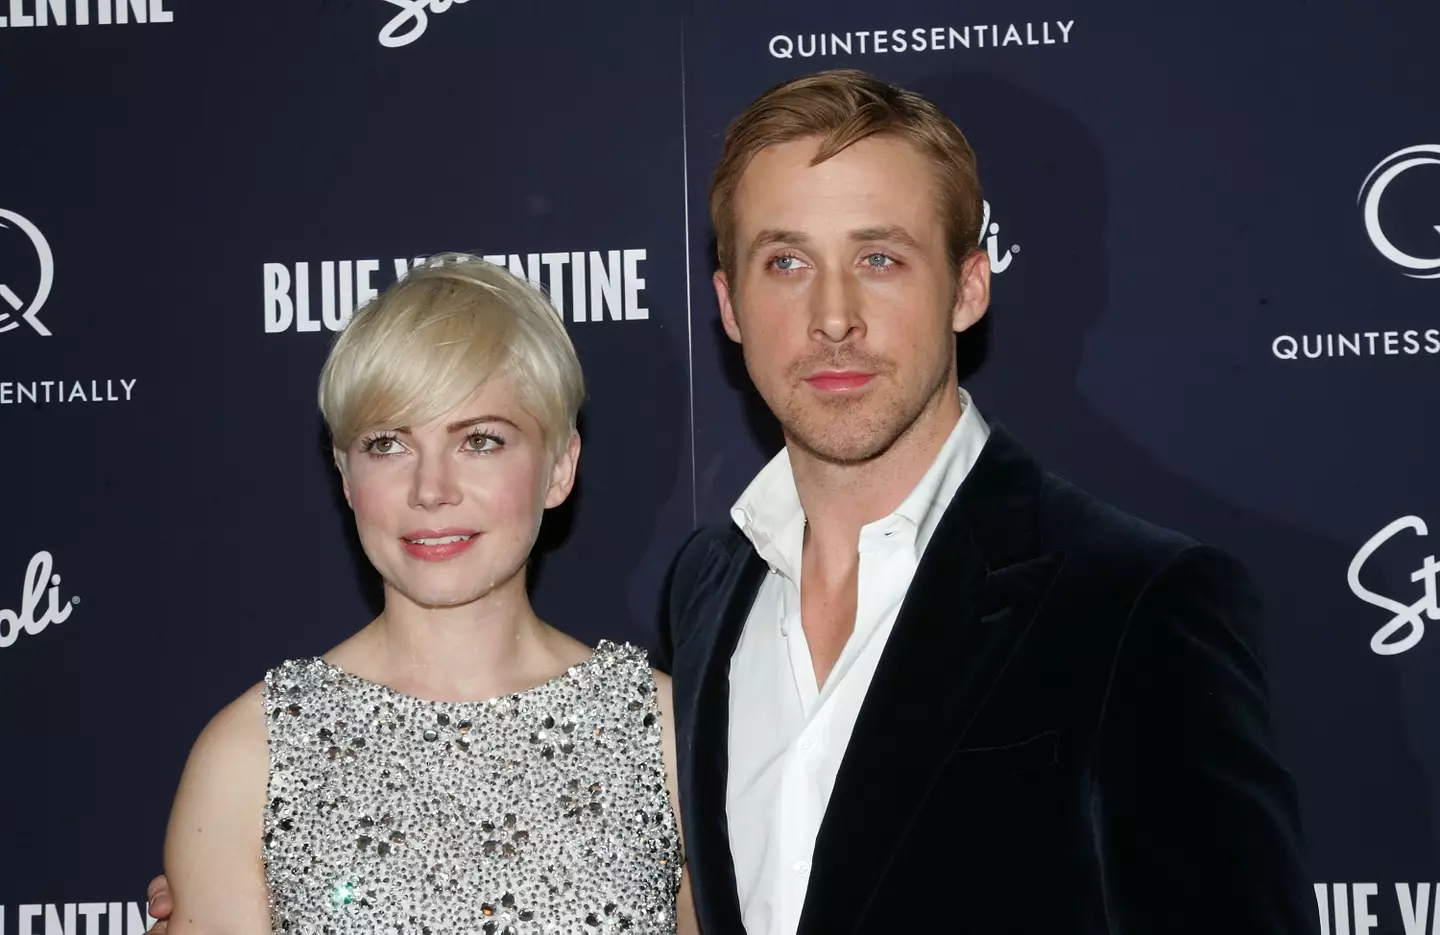 The star duo starred in Blue Valentine.